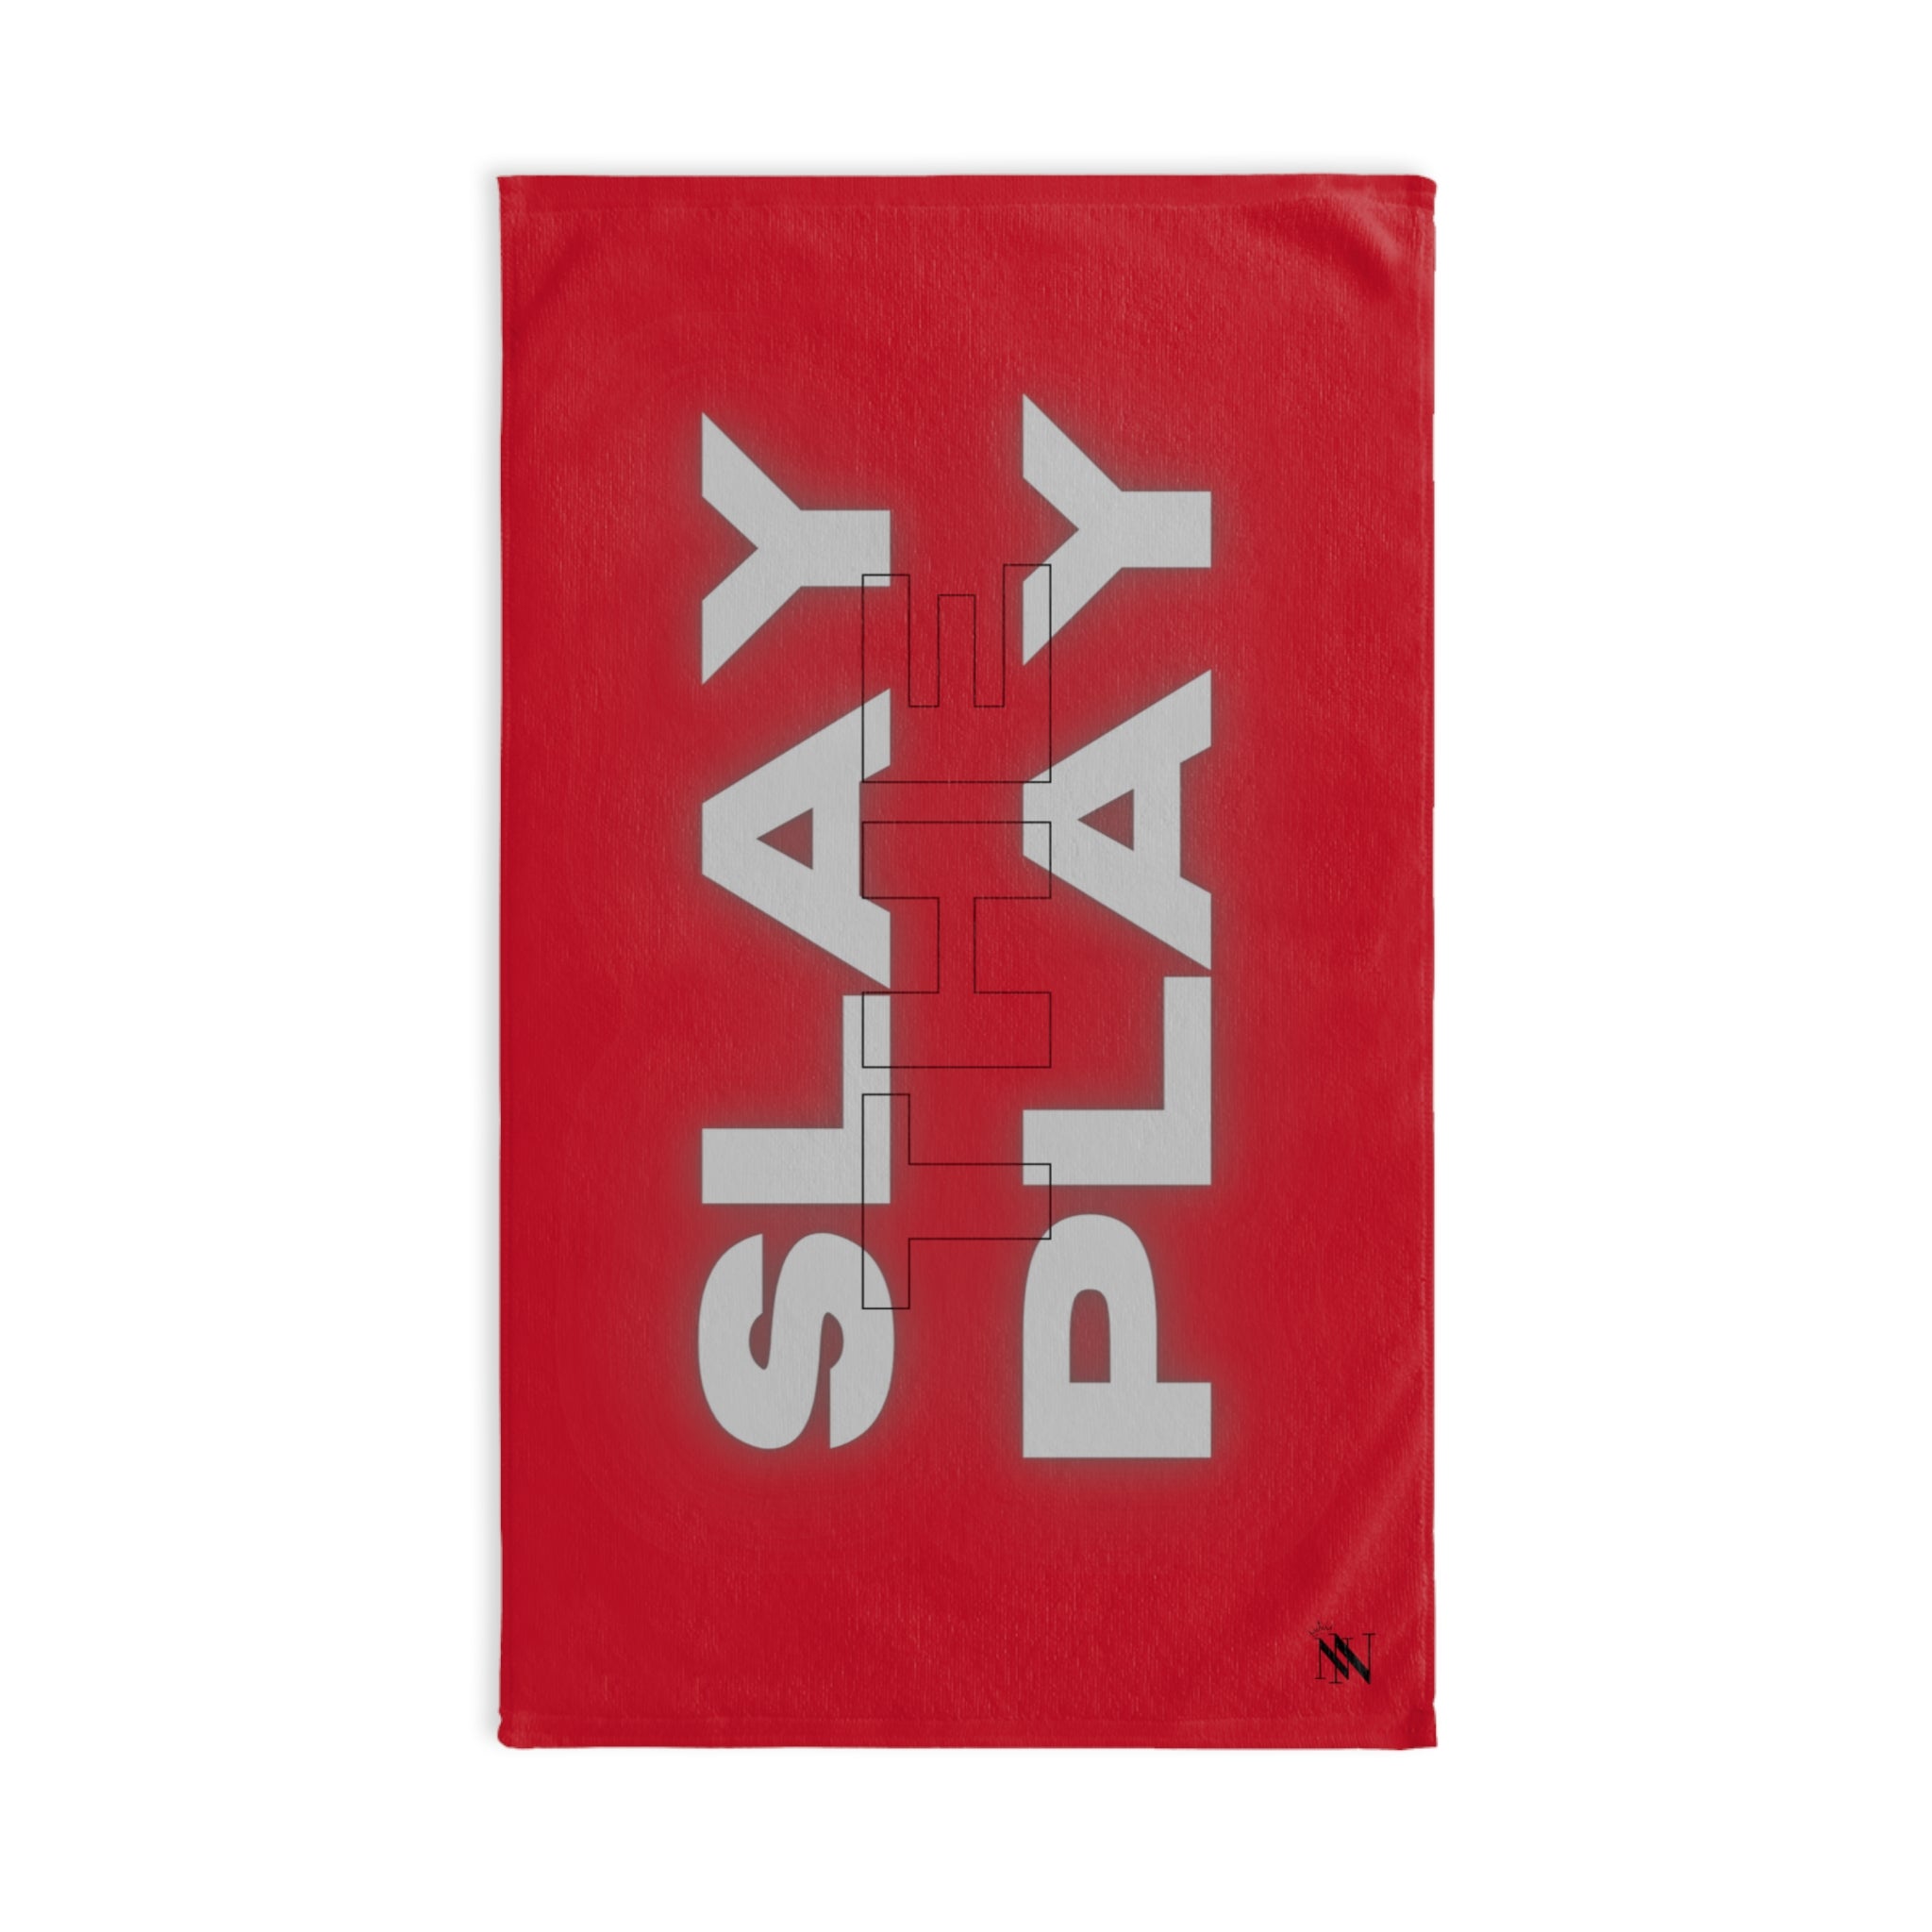 Slay Play Fit Red | Sexy Gifts for Boyfriend, Funny Towel Romantic Gift for Wedding Couple Fiance First Year 2nd Anniversary Valentines, Party Gag Gifts, Joke Humor Cloth for Husband Men BF NECTAR NAPKINS